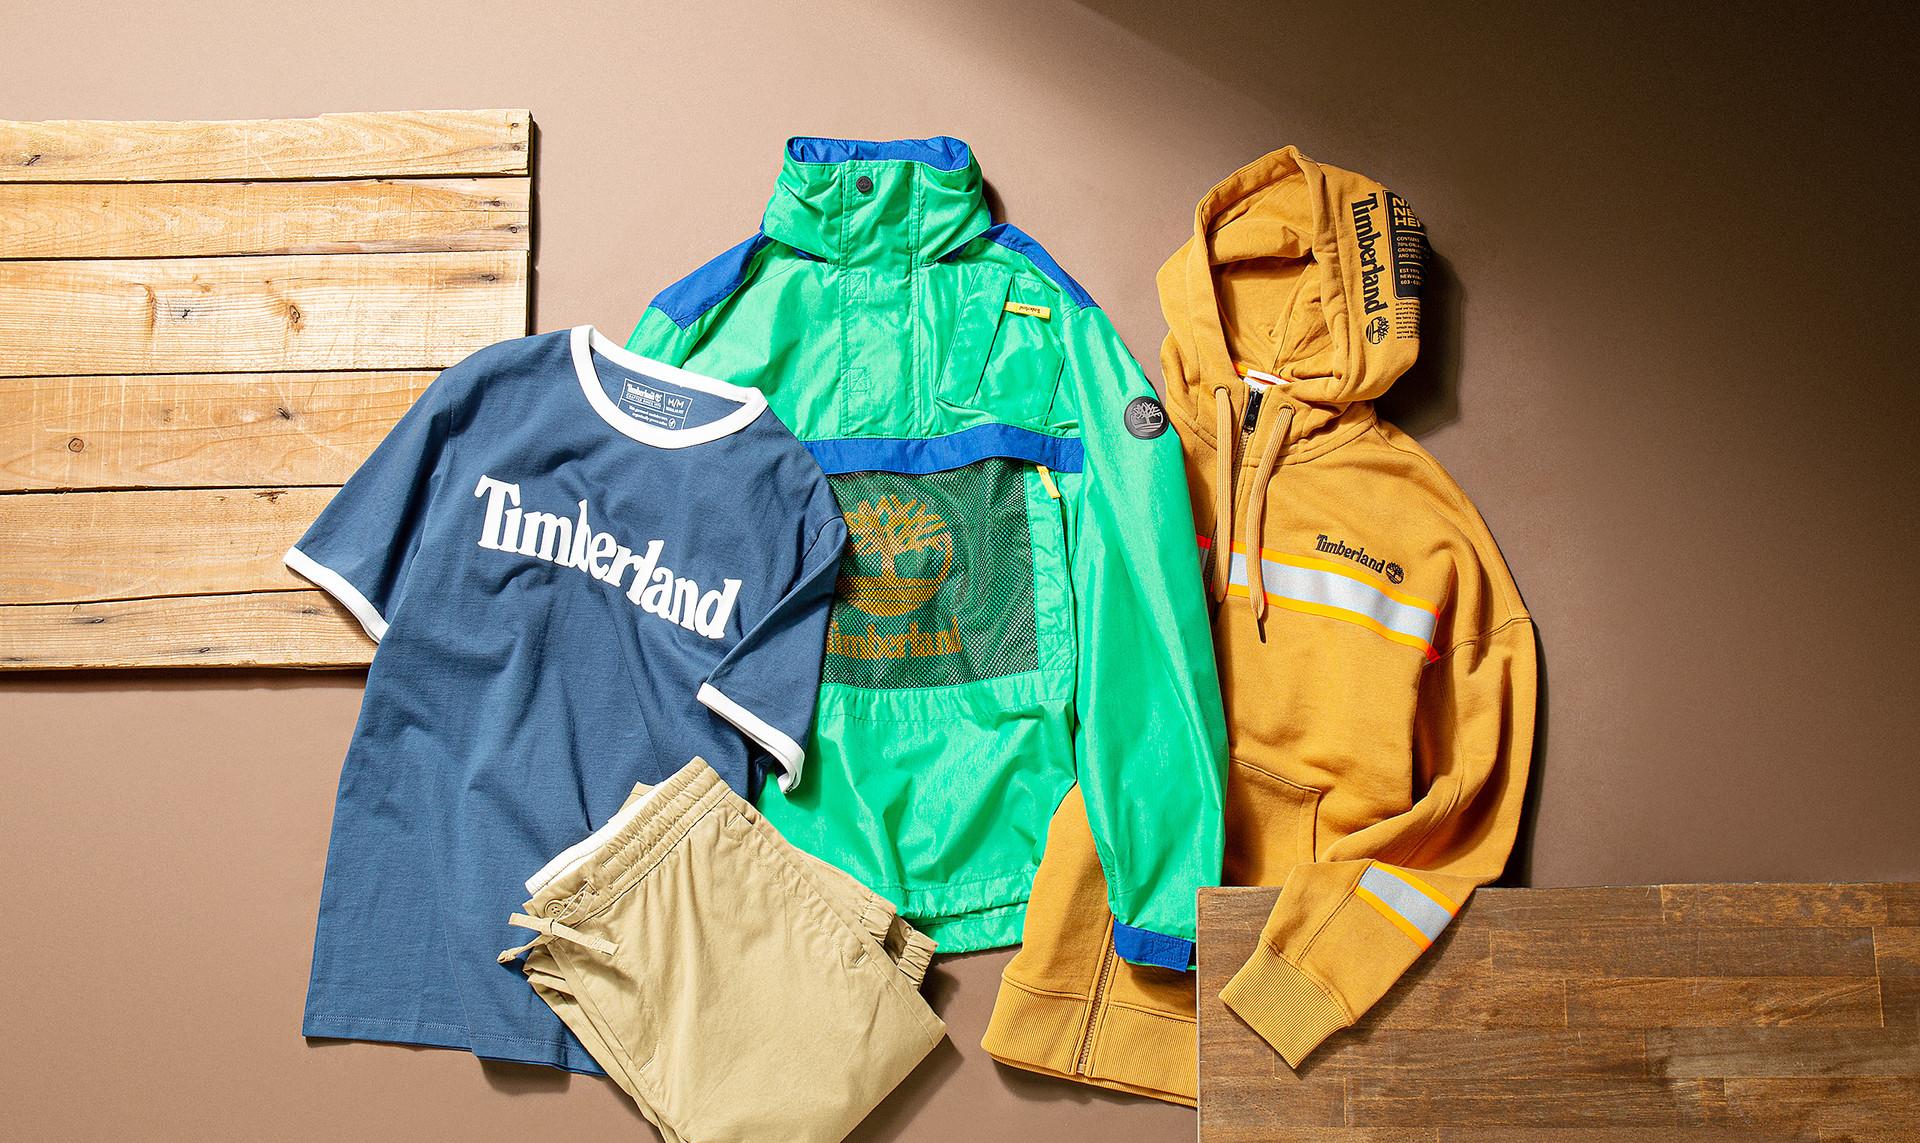 Timberland for Men